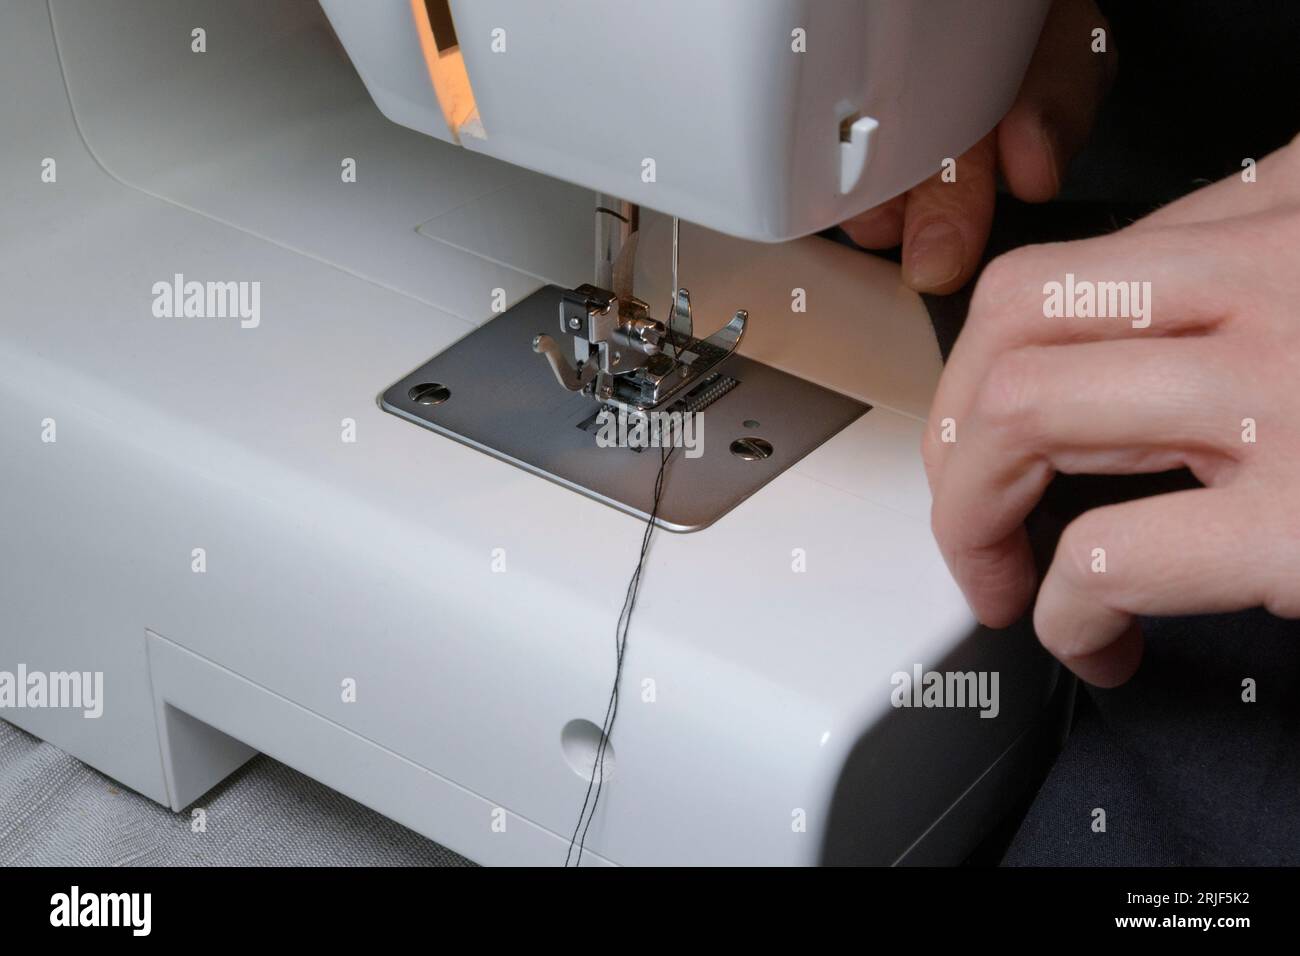 Process of sewing. The correct position of the threads under the needle. Home sewing machine at work. Close-up Stock Photo